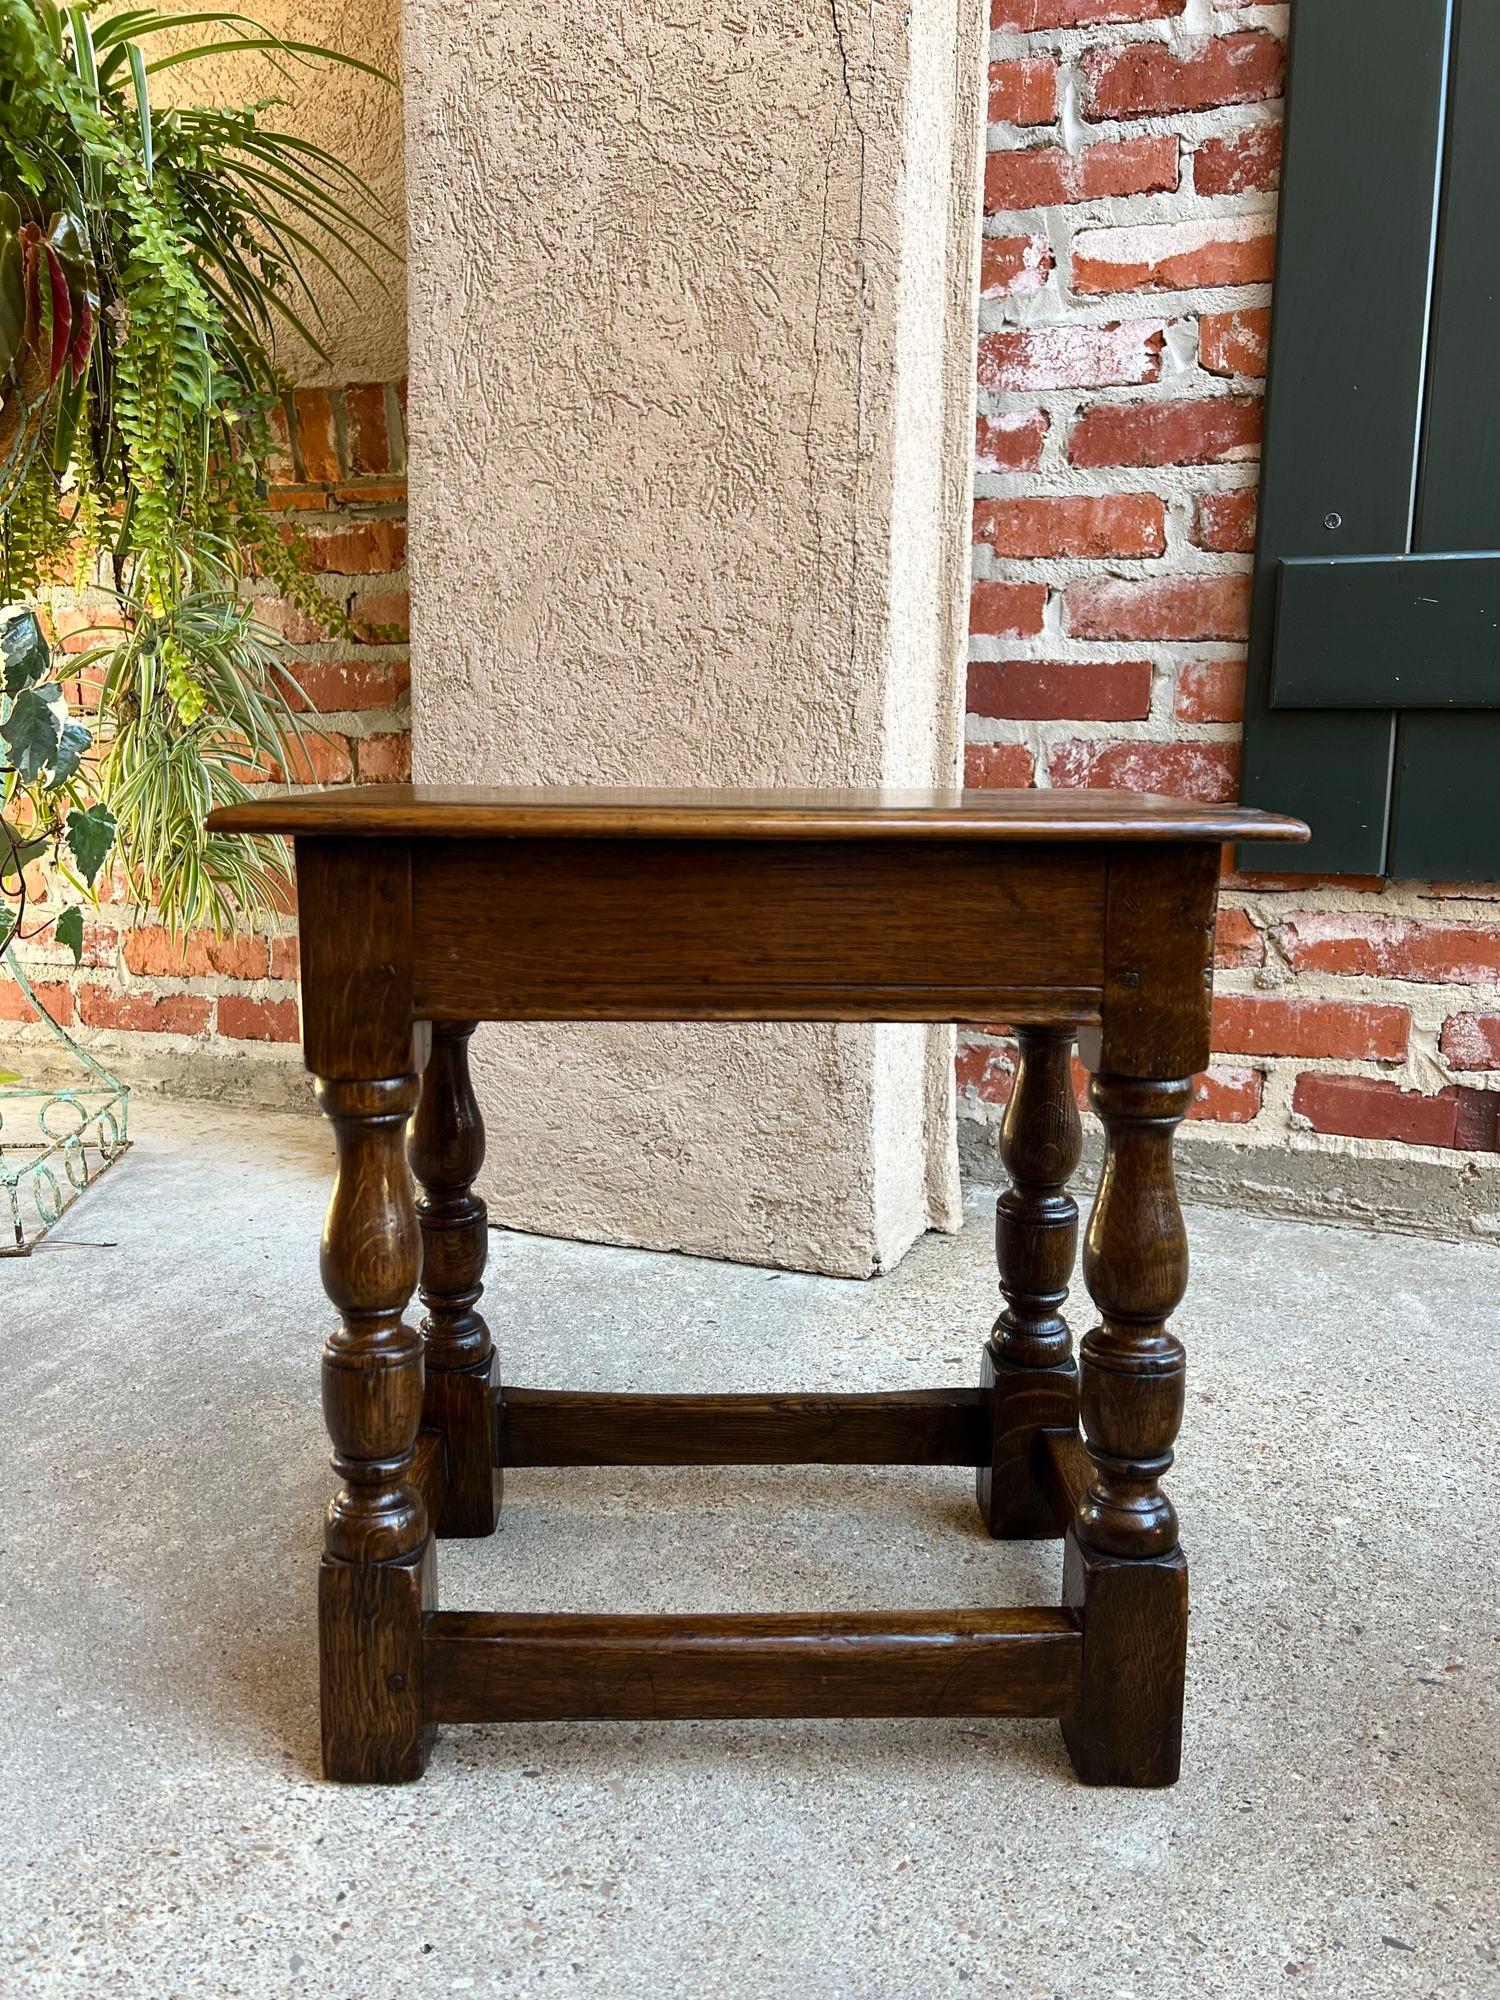 19th century English oak joint stool pegged bench display stand.

 Direct from England, a classic English “joint stool”. One of our most requested antiques, these stools or benches are perfect little occasional pieces, whether at the end of a